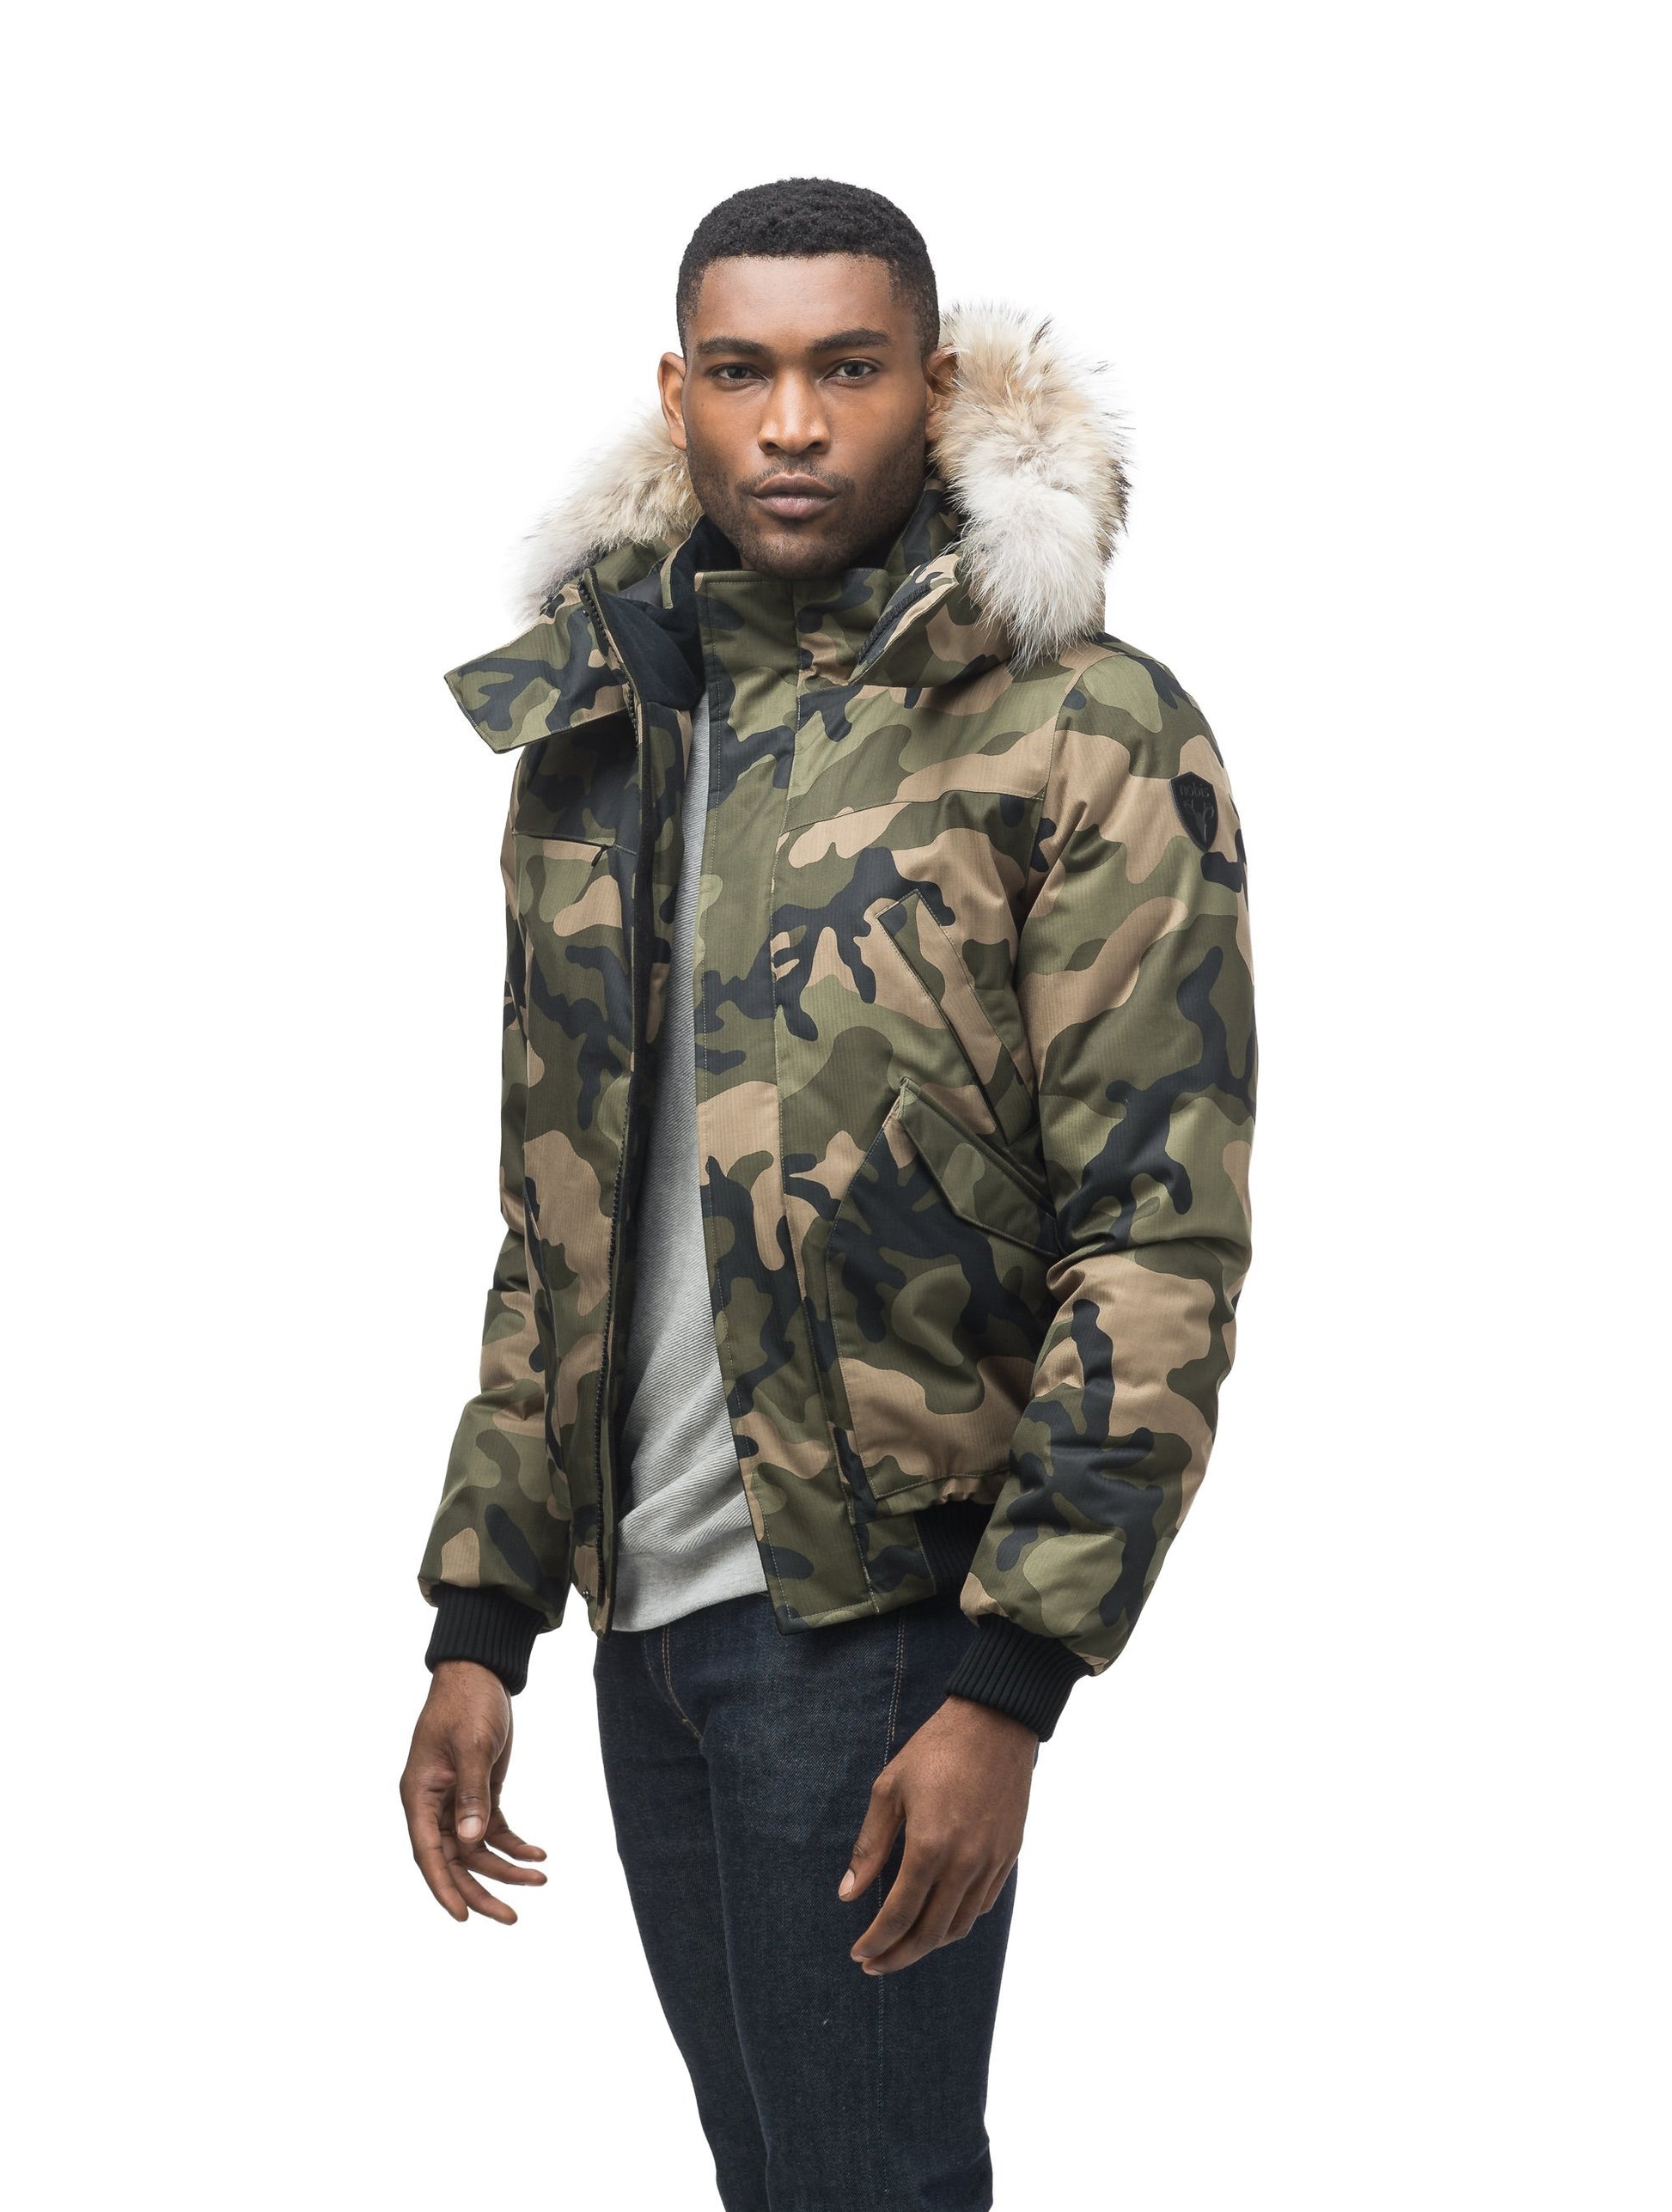 Men's classic down filled bomber jacket with a down filledÃ‚Â hood that features a removable coyote fur trim and concealed moldable framing wire in Camo